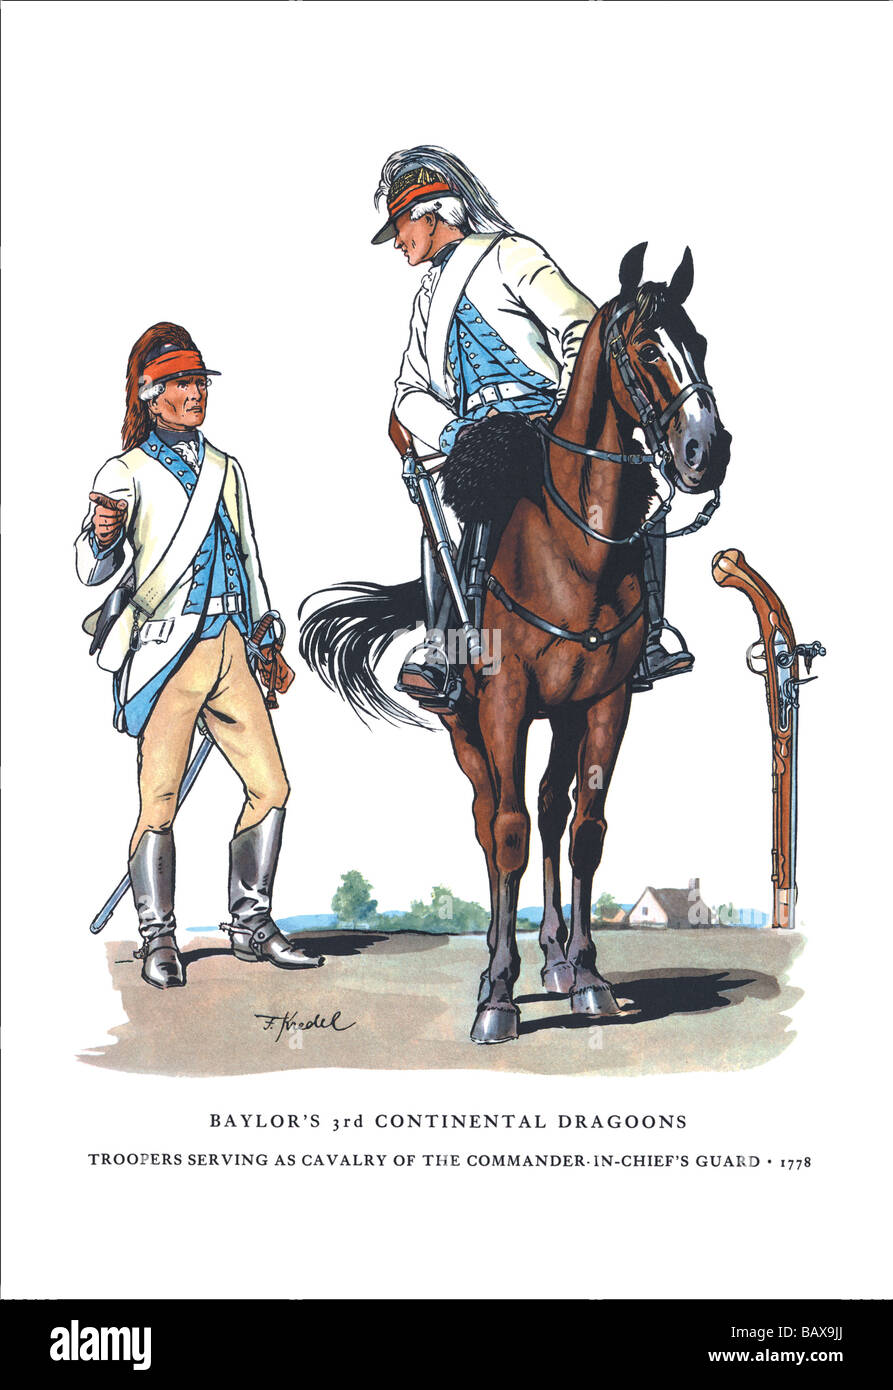 Baylor's Third Continental Dragoons: Troopers Serving as Cavalry of the Commander in Chief's Guard,1778 Stock Photo